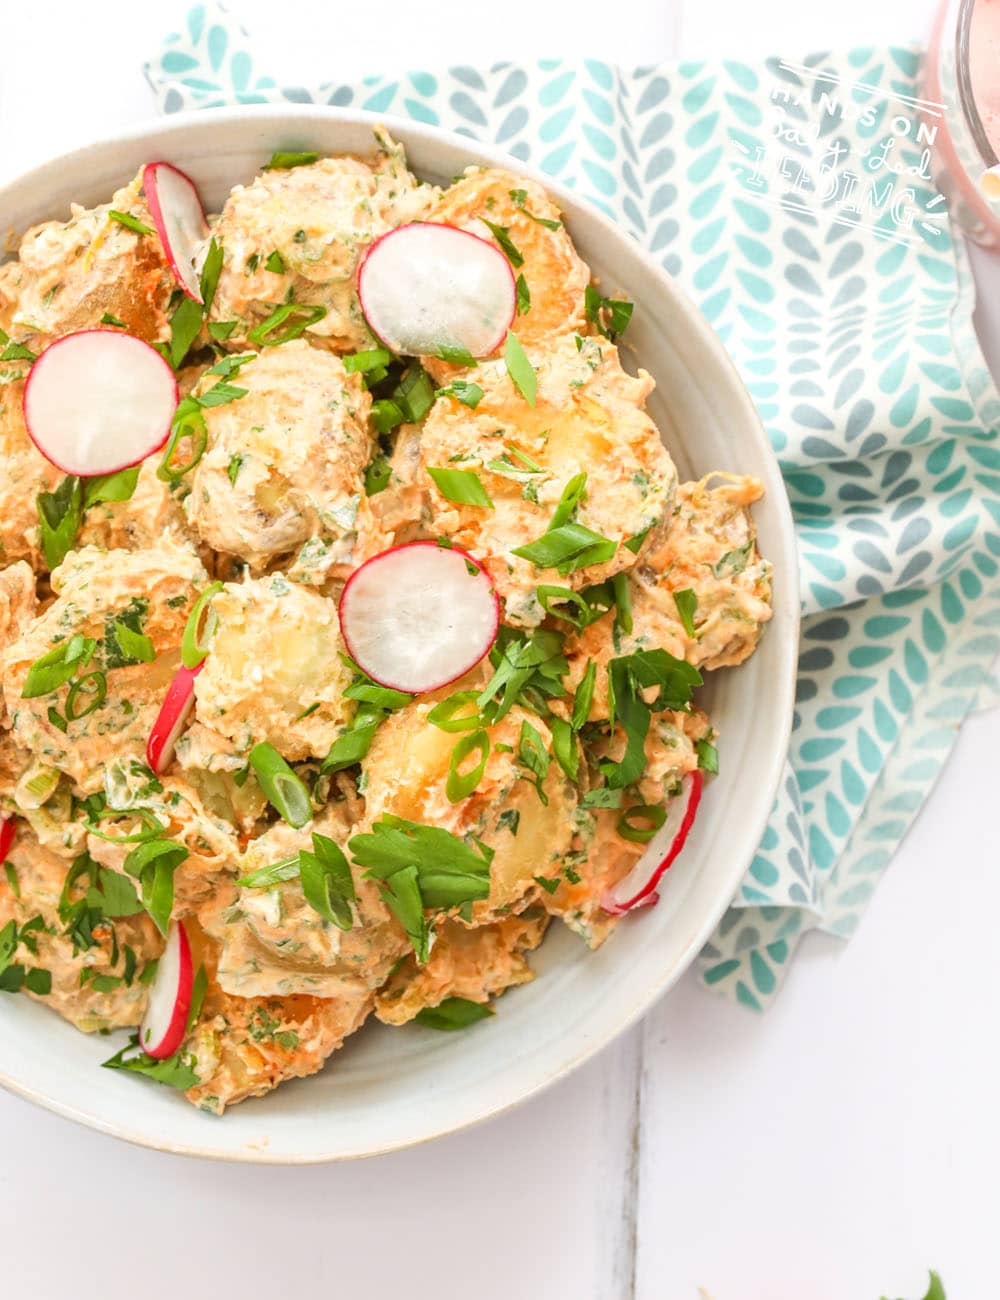 Easy baby led weaning side dish that is perfect to make ahead and super for a summer side dish. No mayo potato salad is made with healthy yogurt and seasoned with spring onions, lemons, apple cider vinegar and topped with zesty radishes. #healthysides #babyledweaning #potatosalad #makeahead #babyledfeeding #toddlerfood 